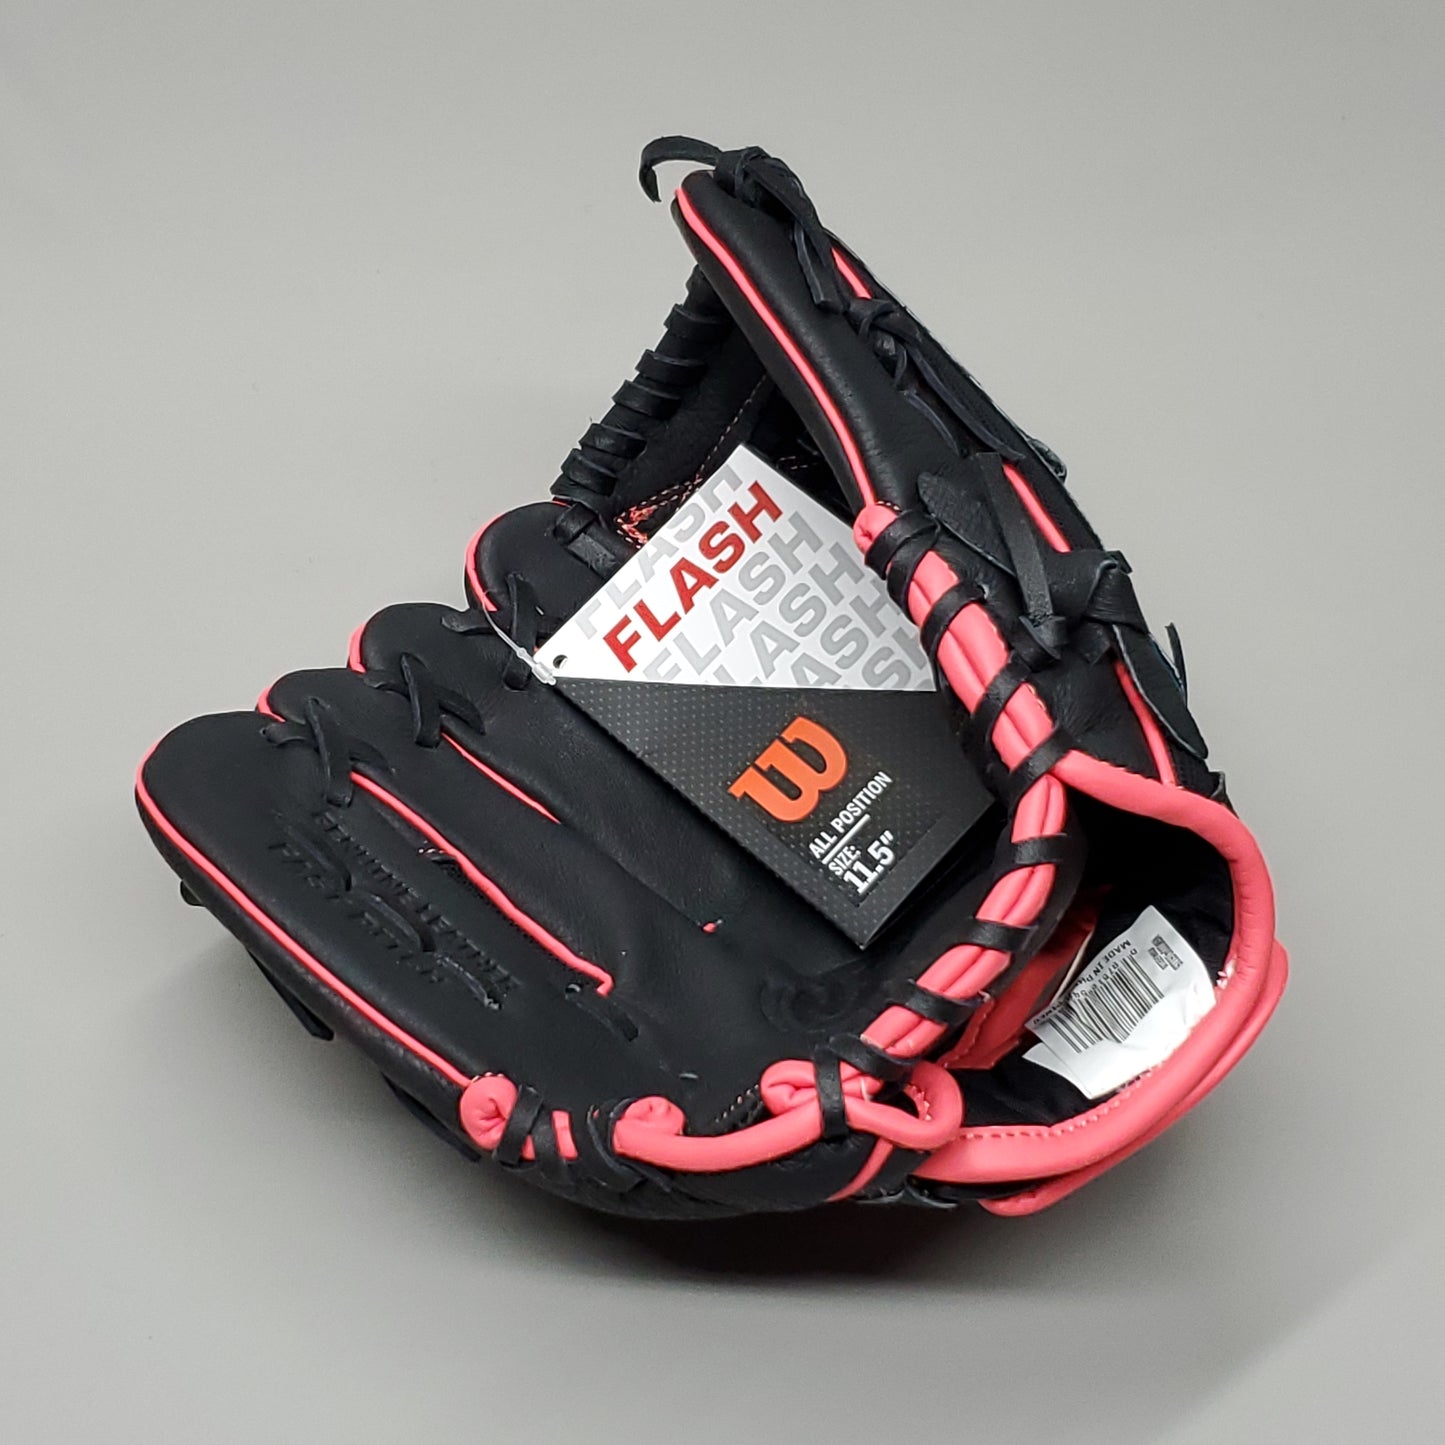 WILSON Fastpitch All Position Right Hand Mit 11.5" Flash WBW100415115 (New)